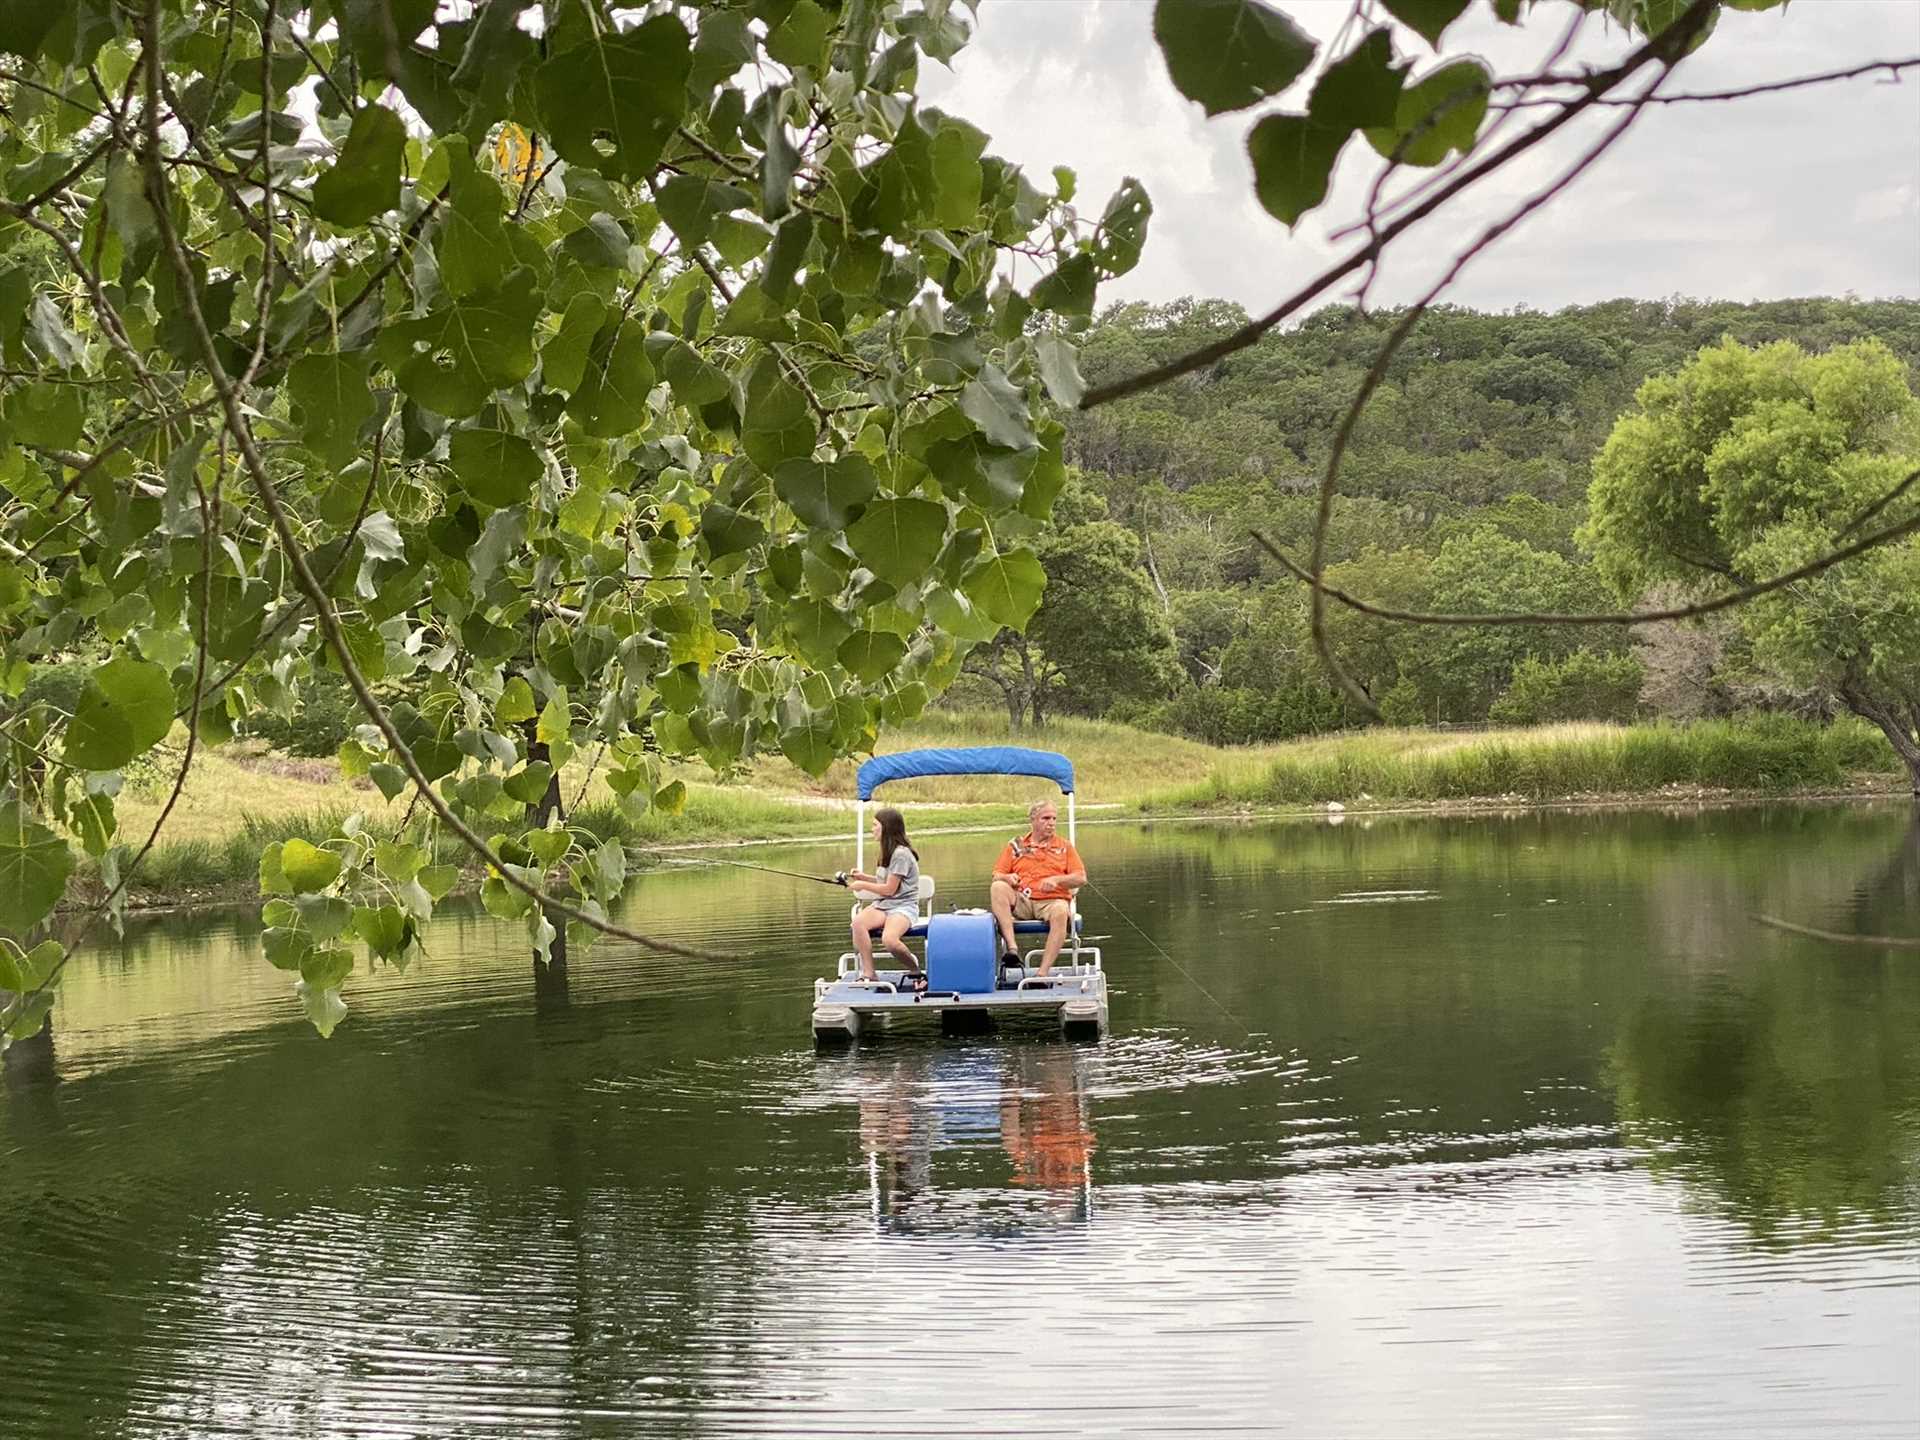                                                 Climb onto one of the provided paddle boats and have a fun scenic tour!